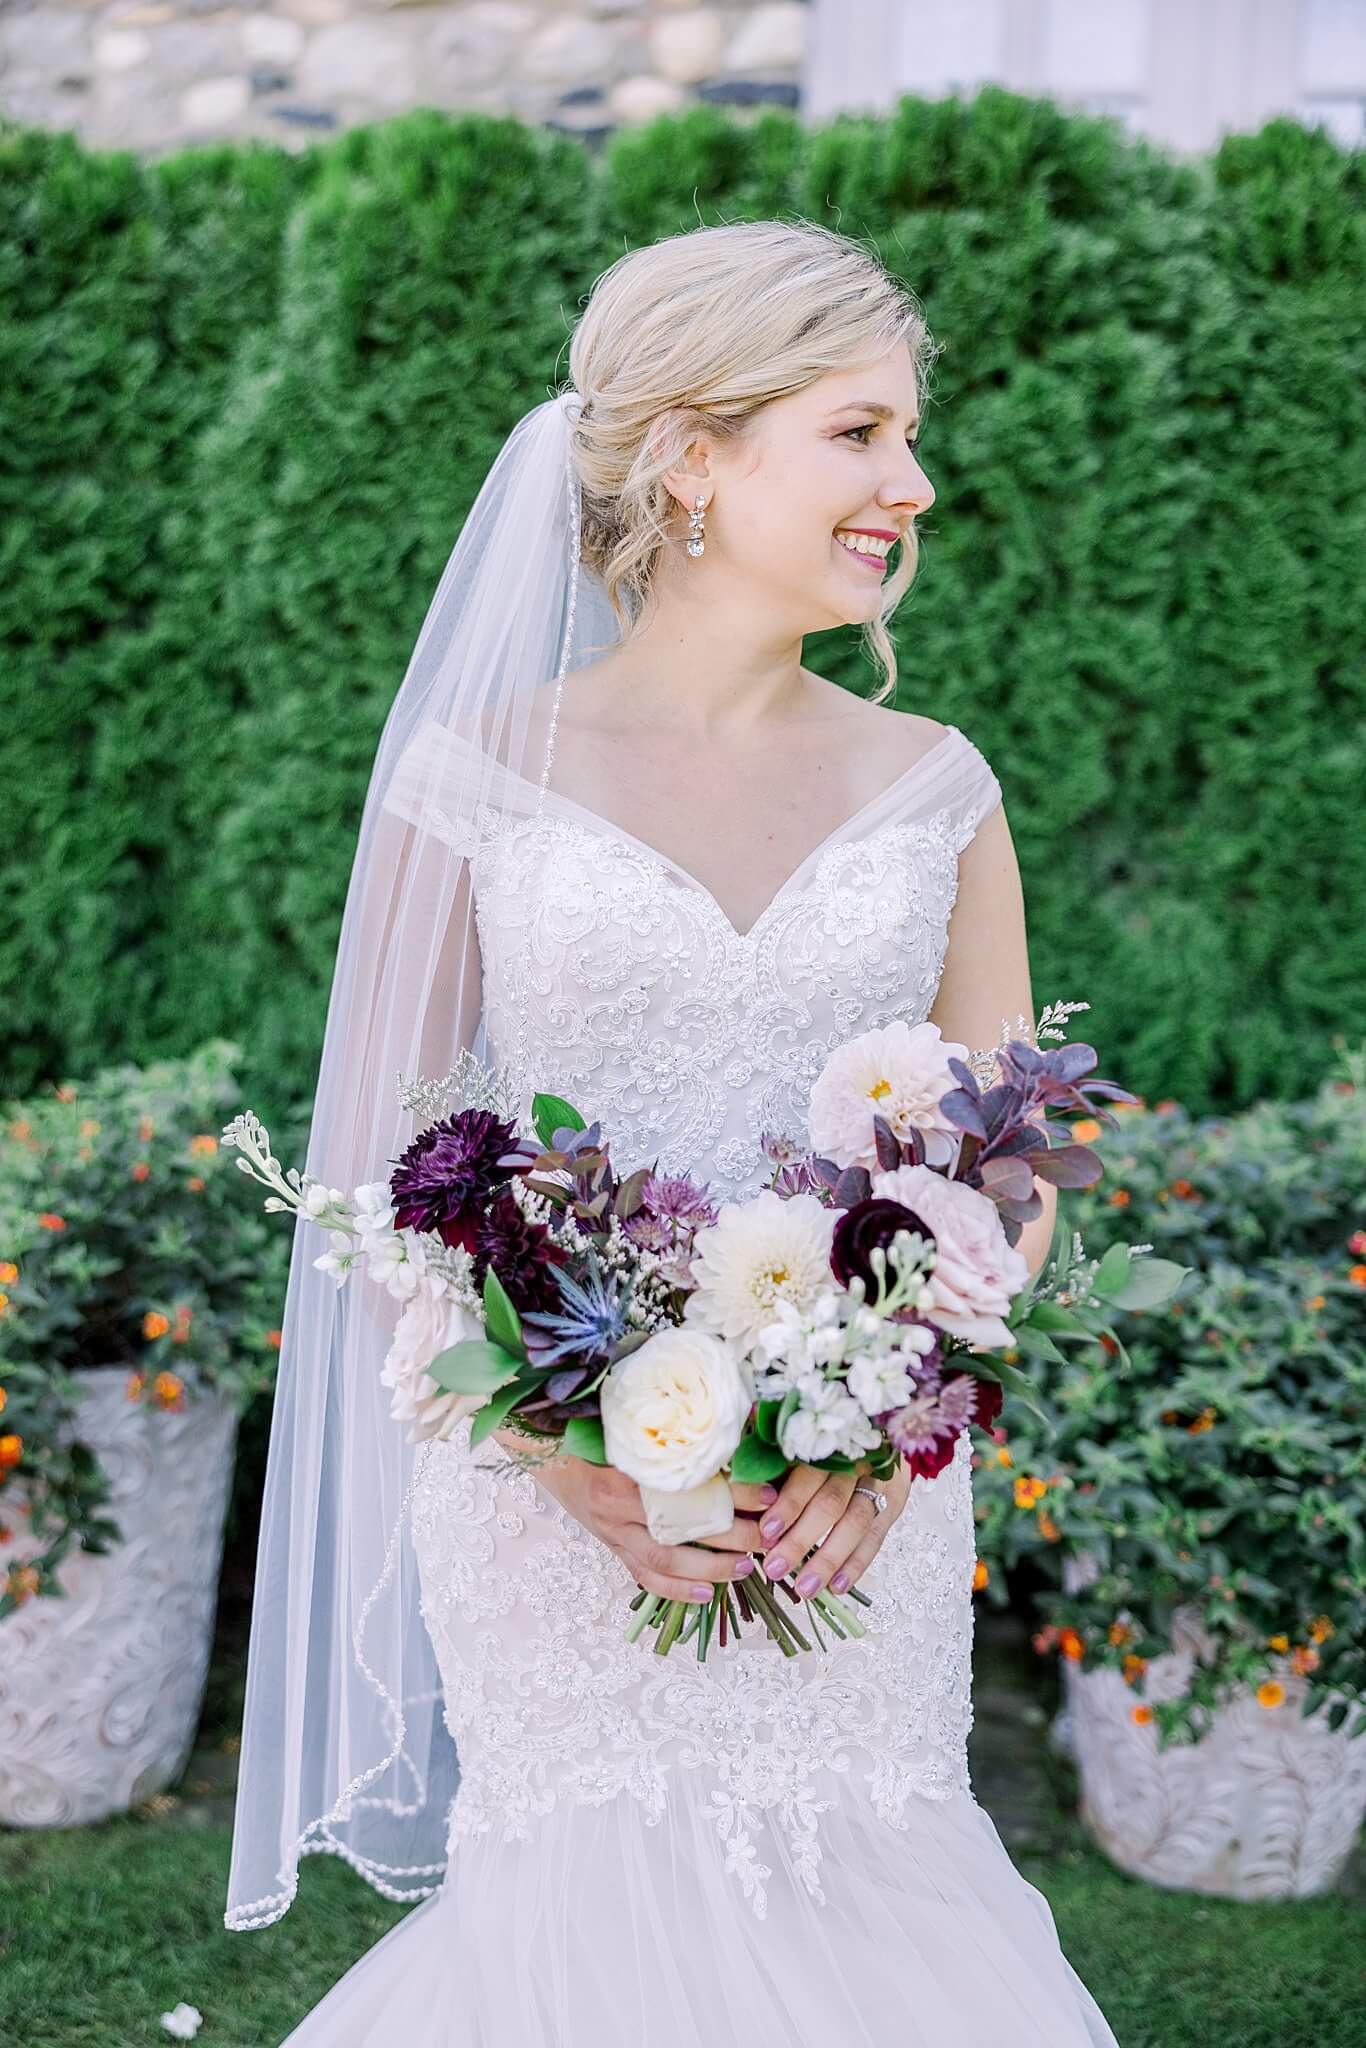 Bride smiles while holding her wedding bouquet at Castle Farms wedding.